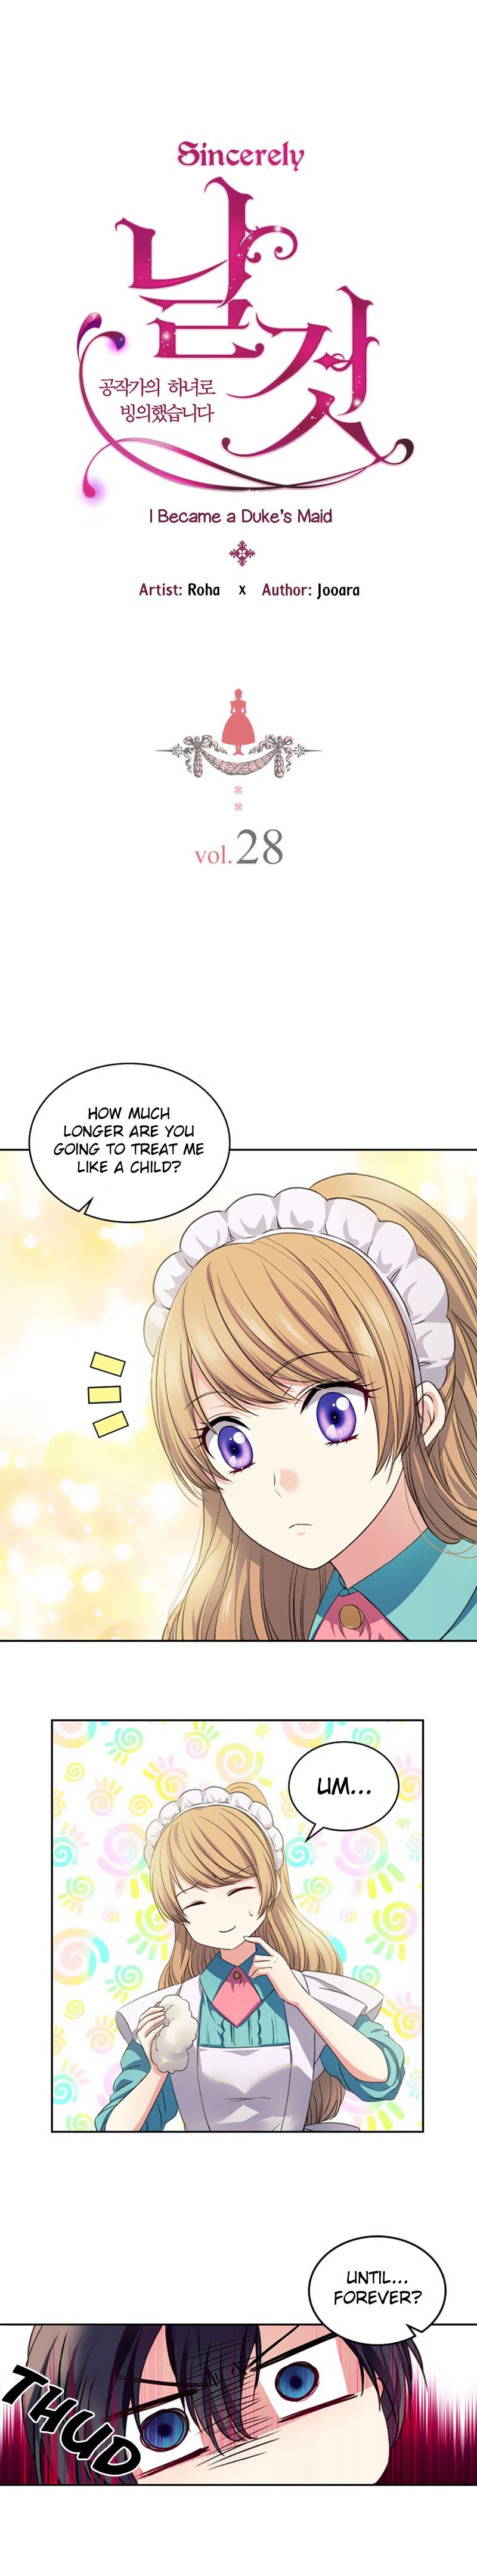 Sincerely: I Became a Duke’s Maid Chapter 28 - Page 1